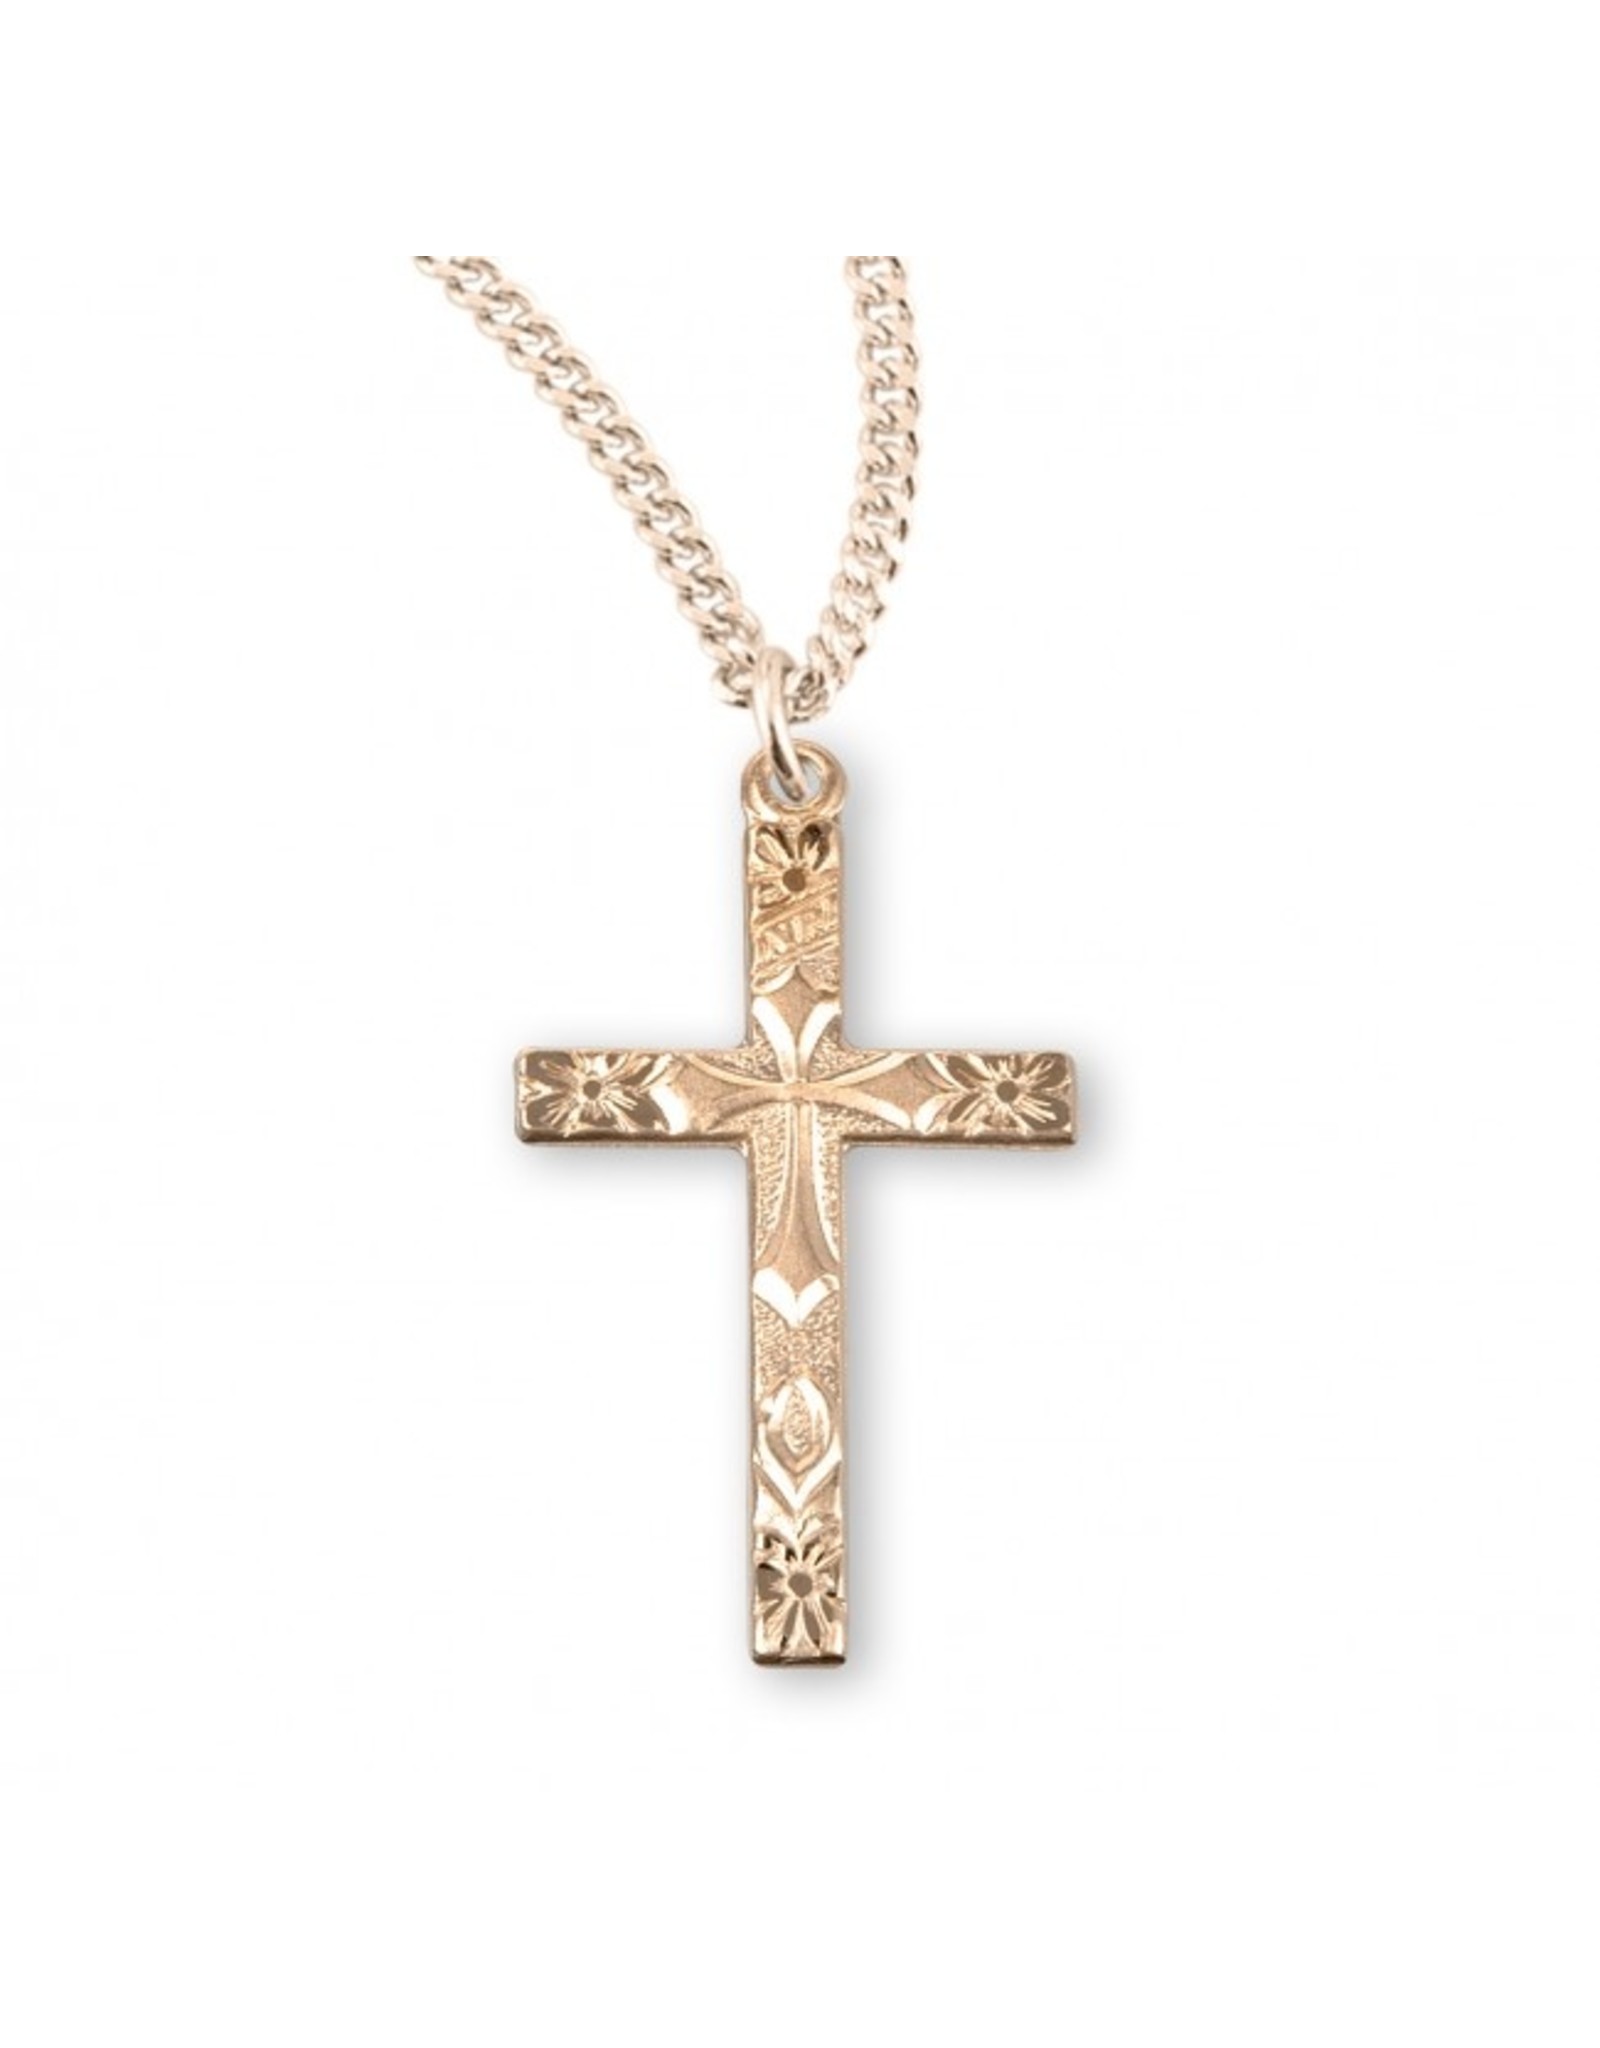 Cross Medal, Flower Tipped, Gold Over Sterling Silver, 18" Chain